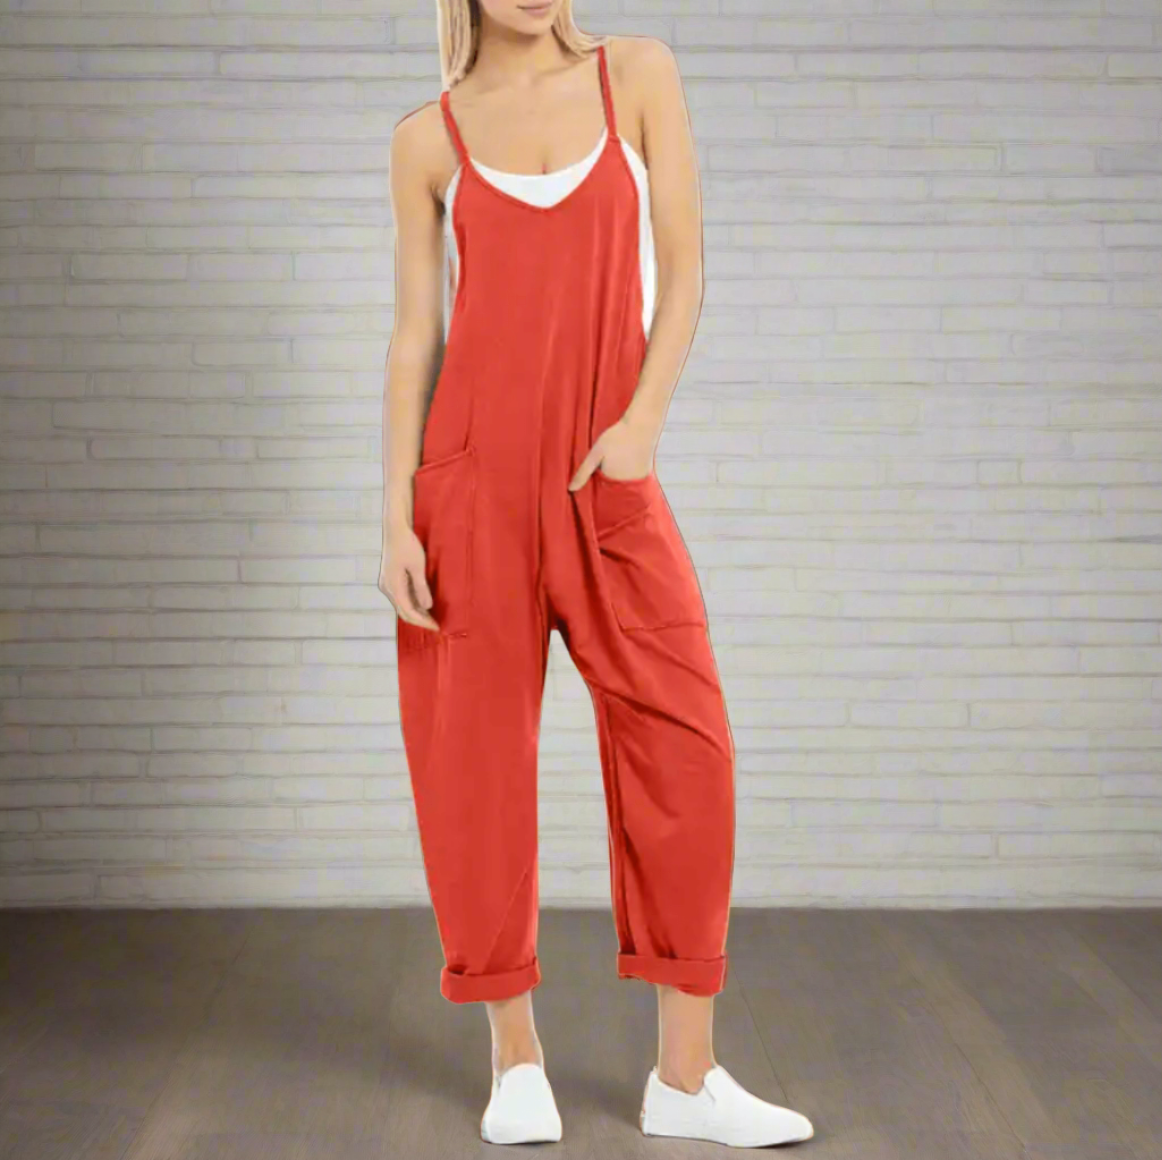 Women's Relaxed Fit Jumpsuit for Ultimate Comfort - Dixie Hike & Style